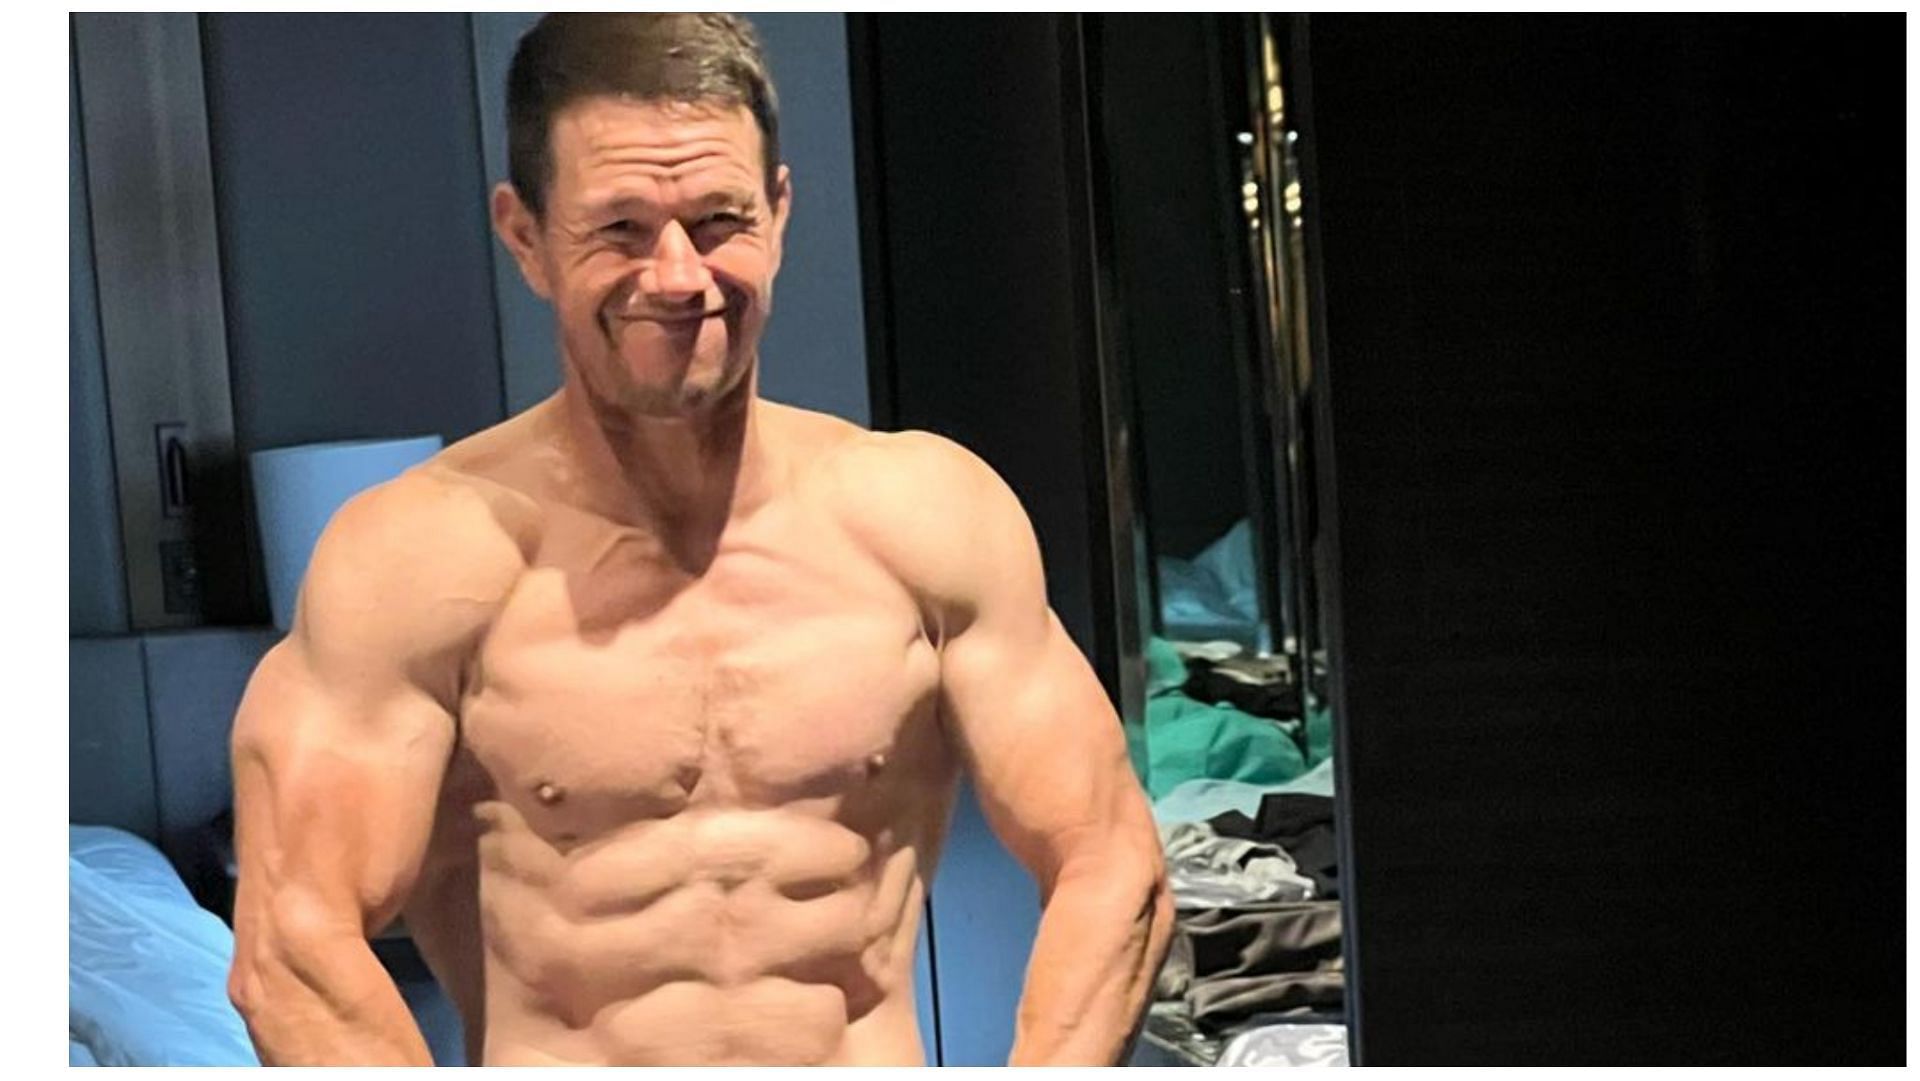 Mark Wahlberg was certainly hot in 1990s, but guess what he